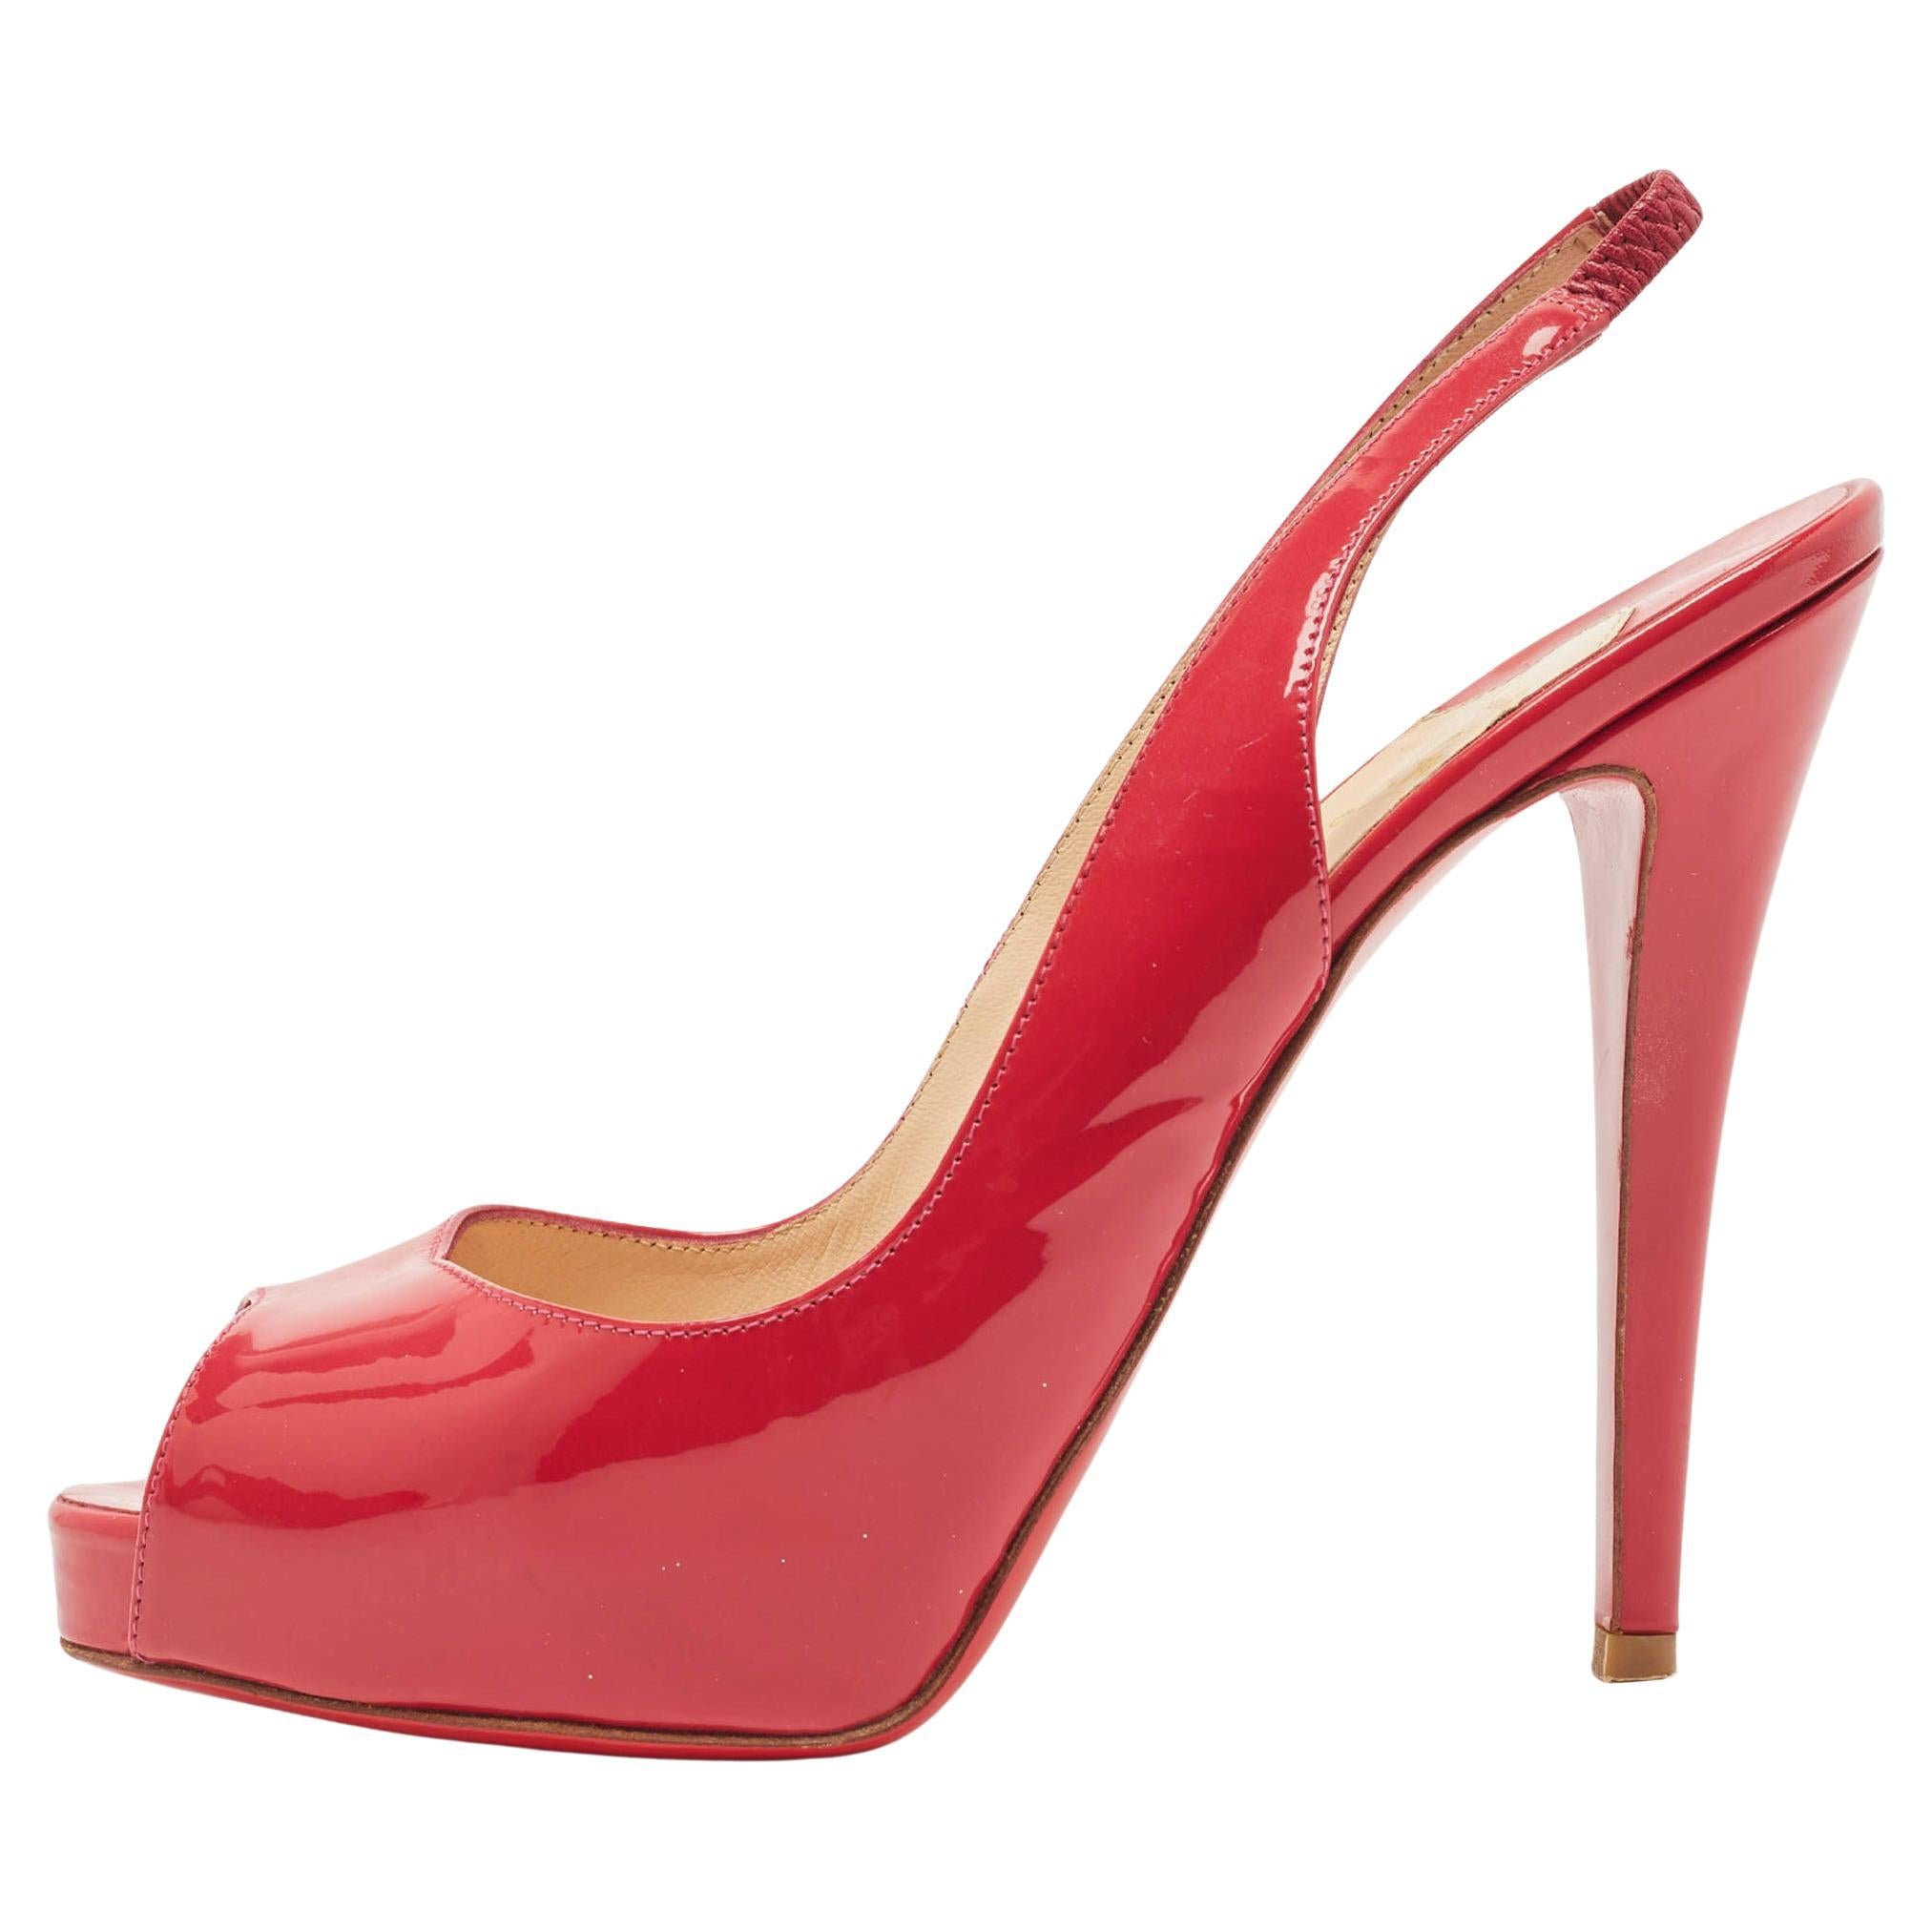 Christian Louboutin Red Patent Leather Private Number Peep Toe Slingback Sandals